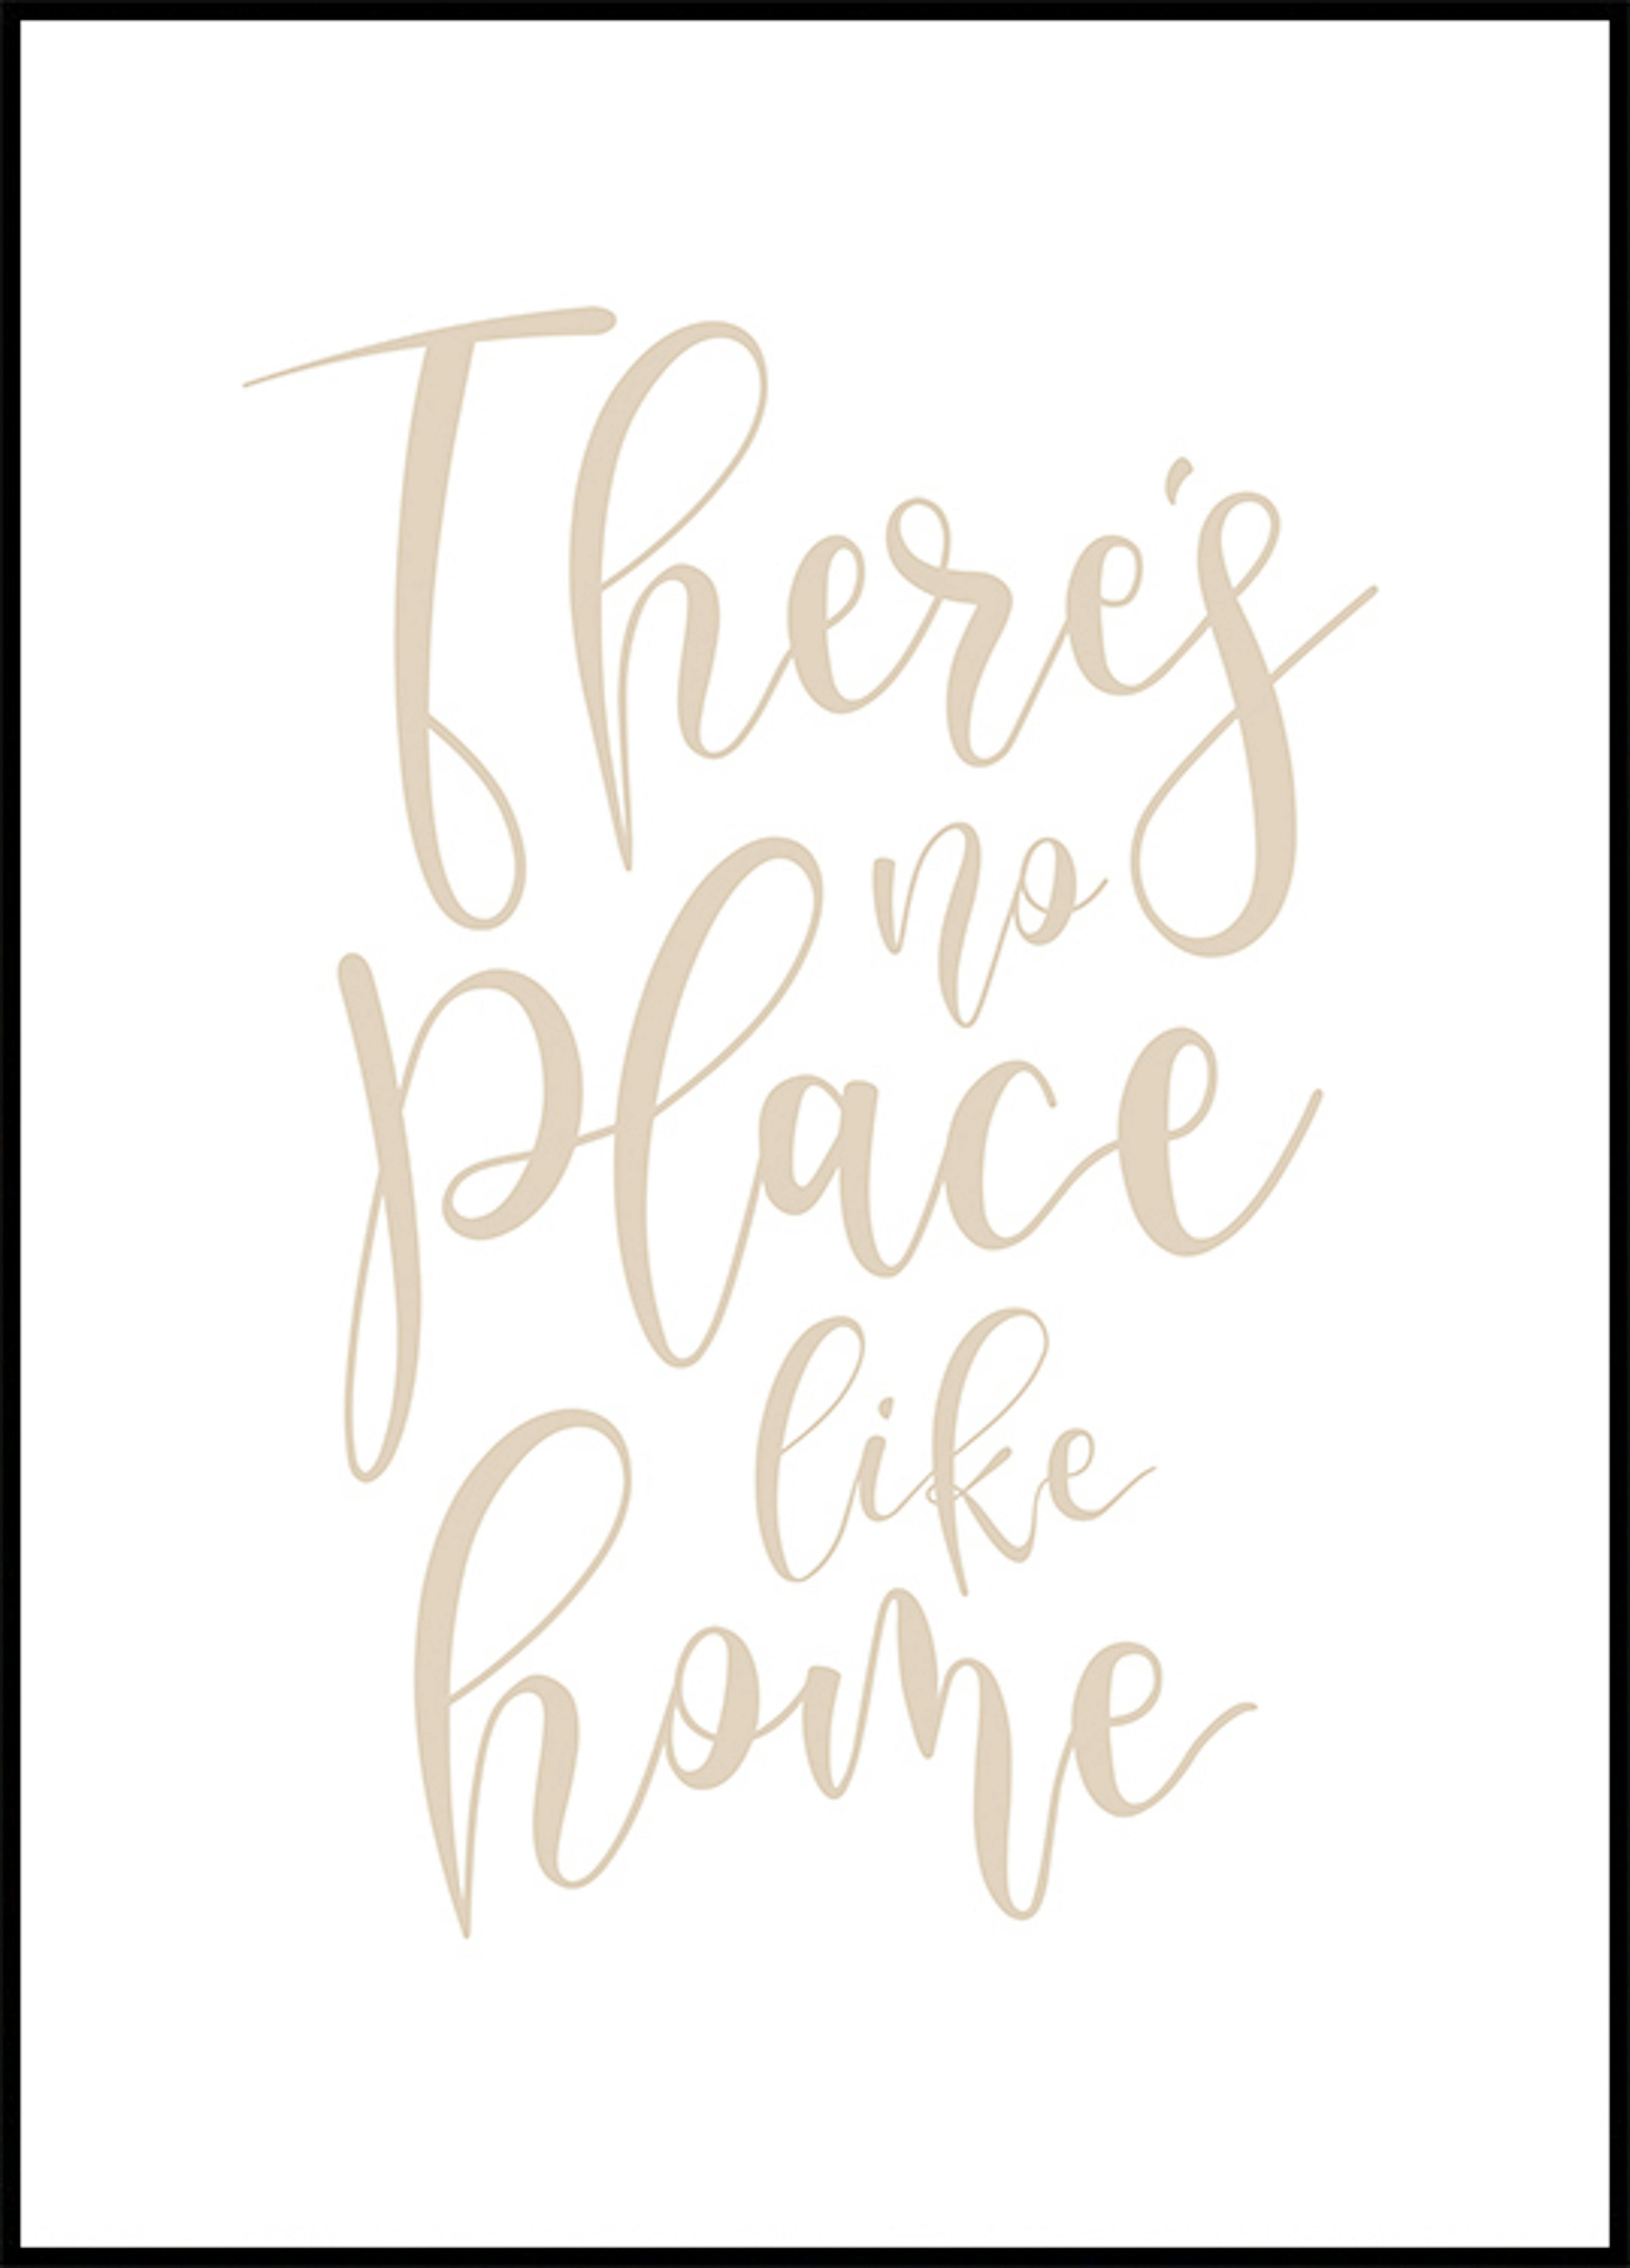 There is No Place Like Home Poster 0